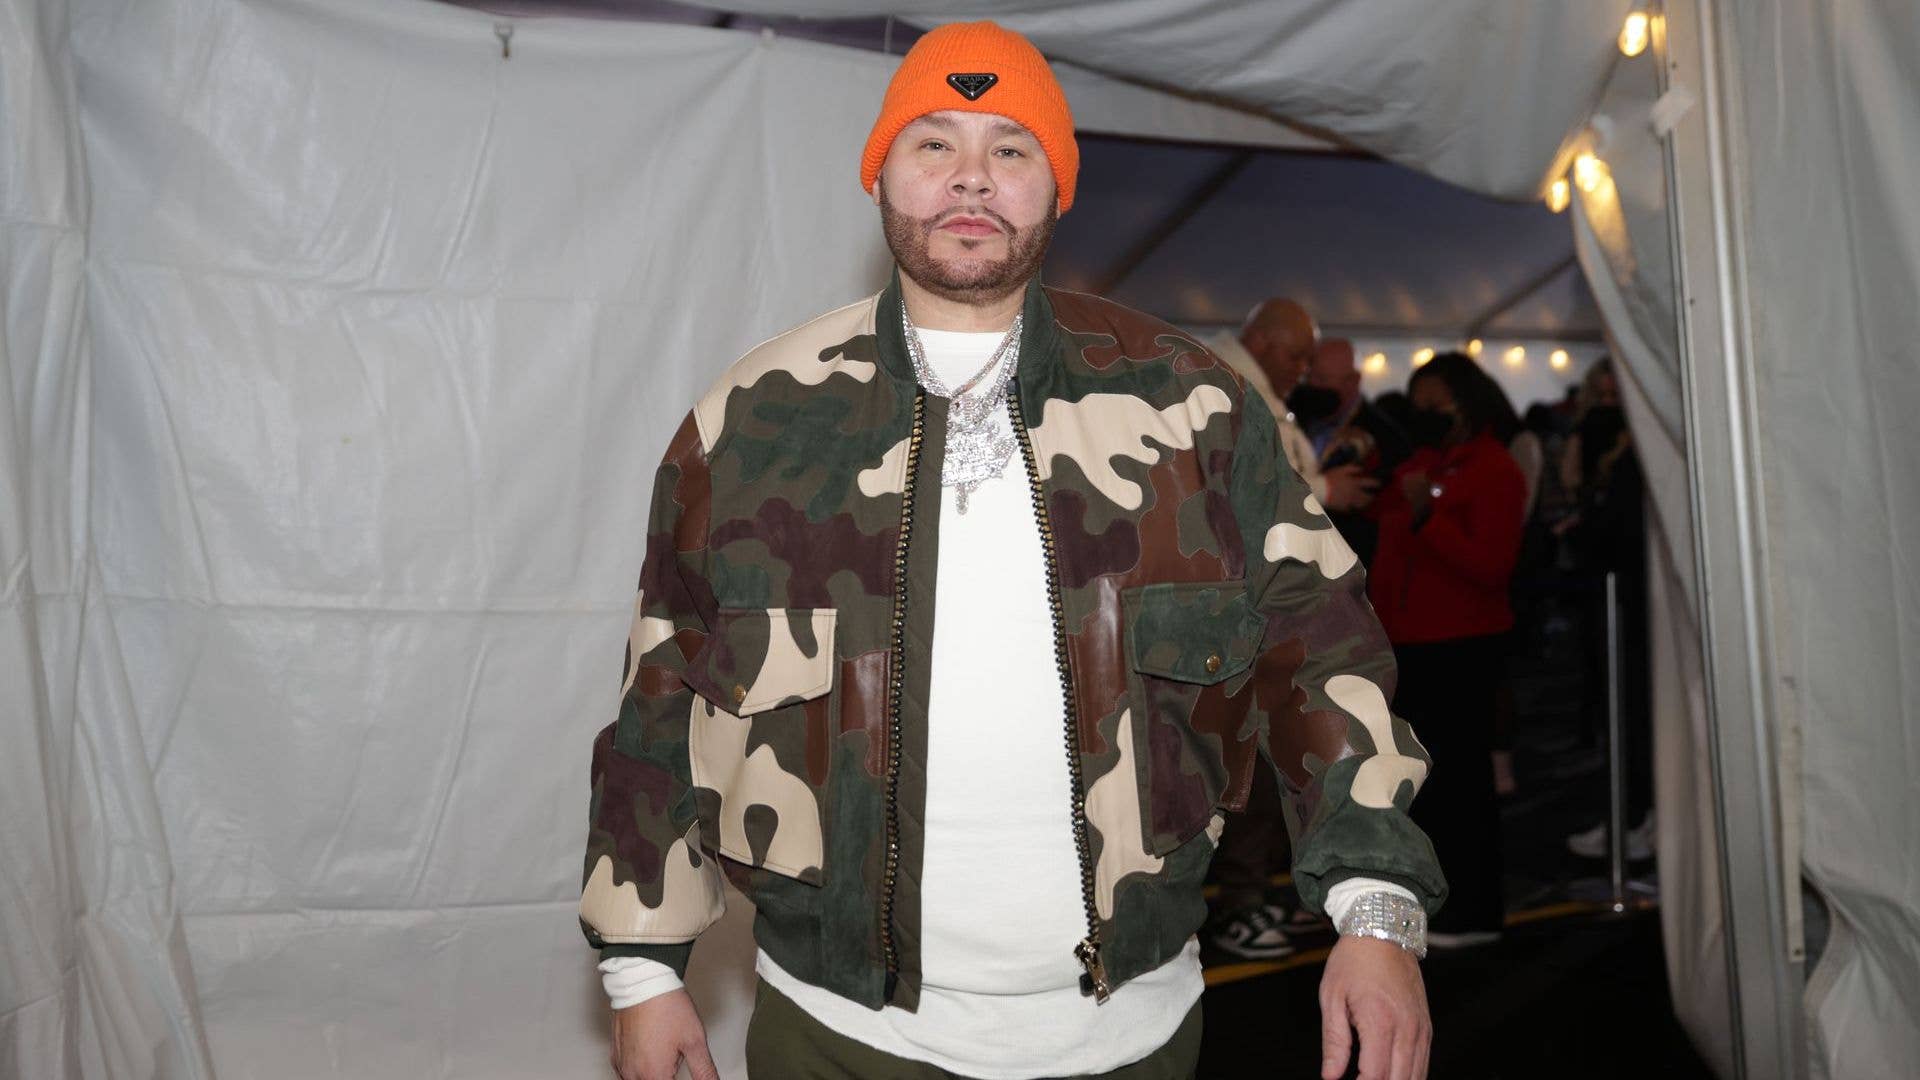 Rapper, Fat Joe is seen during the 71st NBA All Star Game on Sunday, February 20, 2022